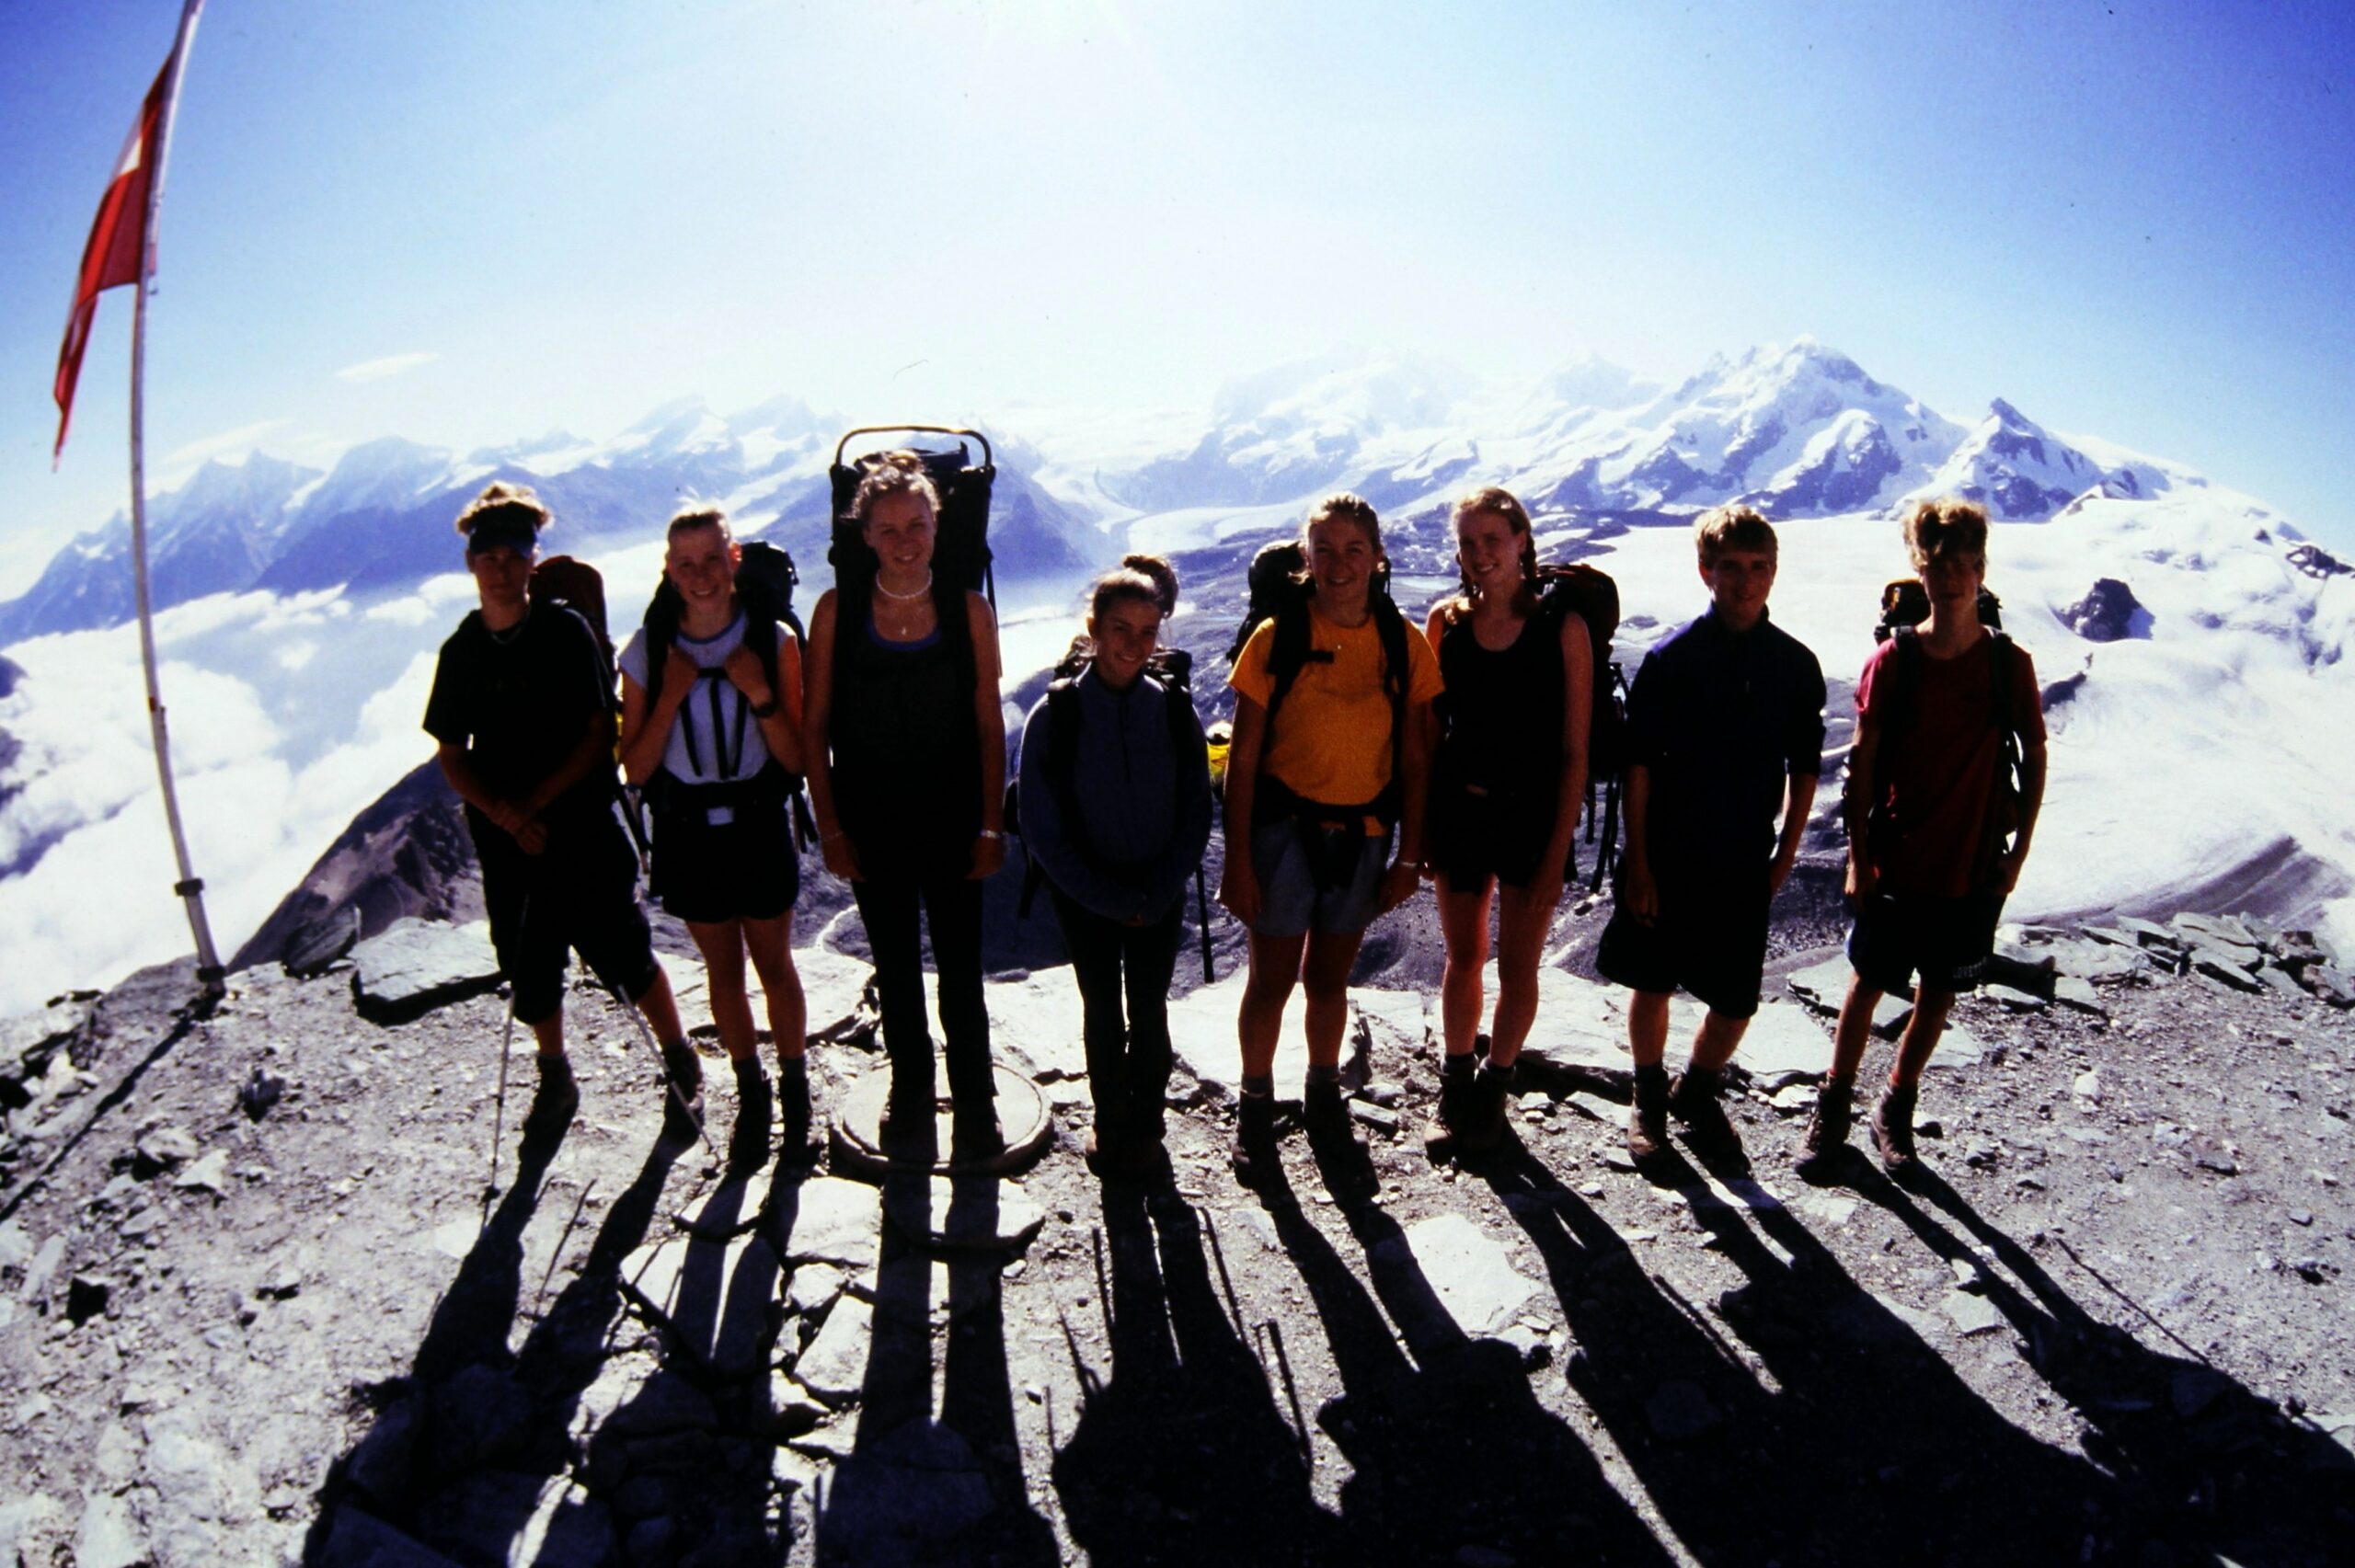 2002 group backpacking photo